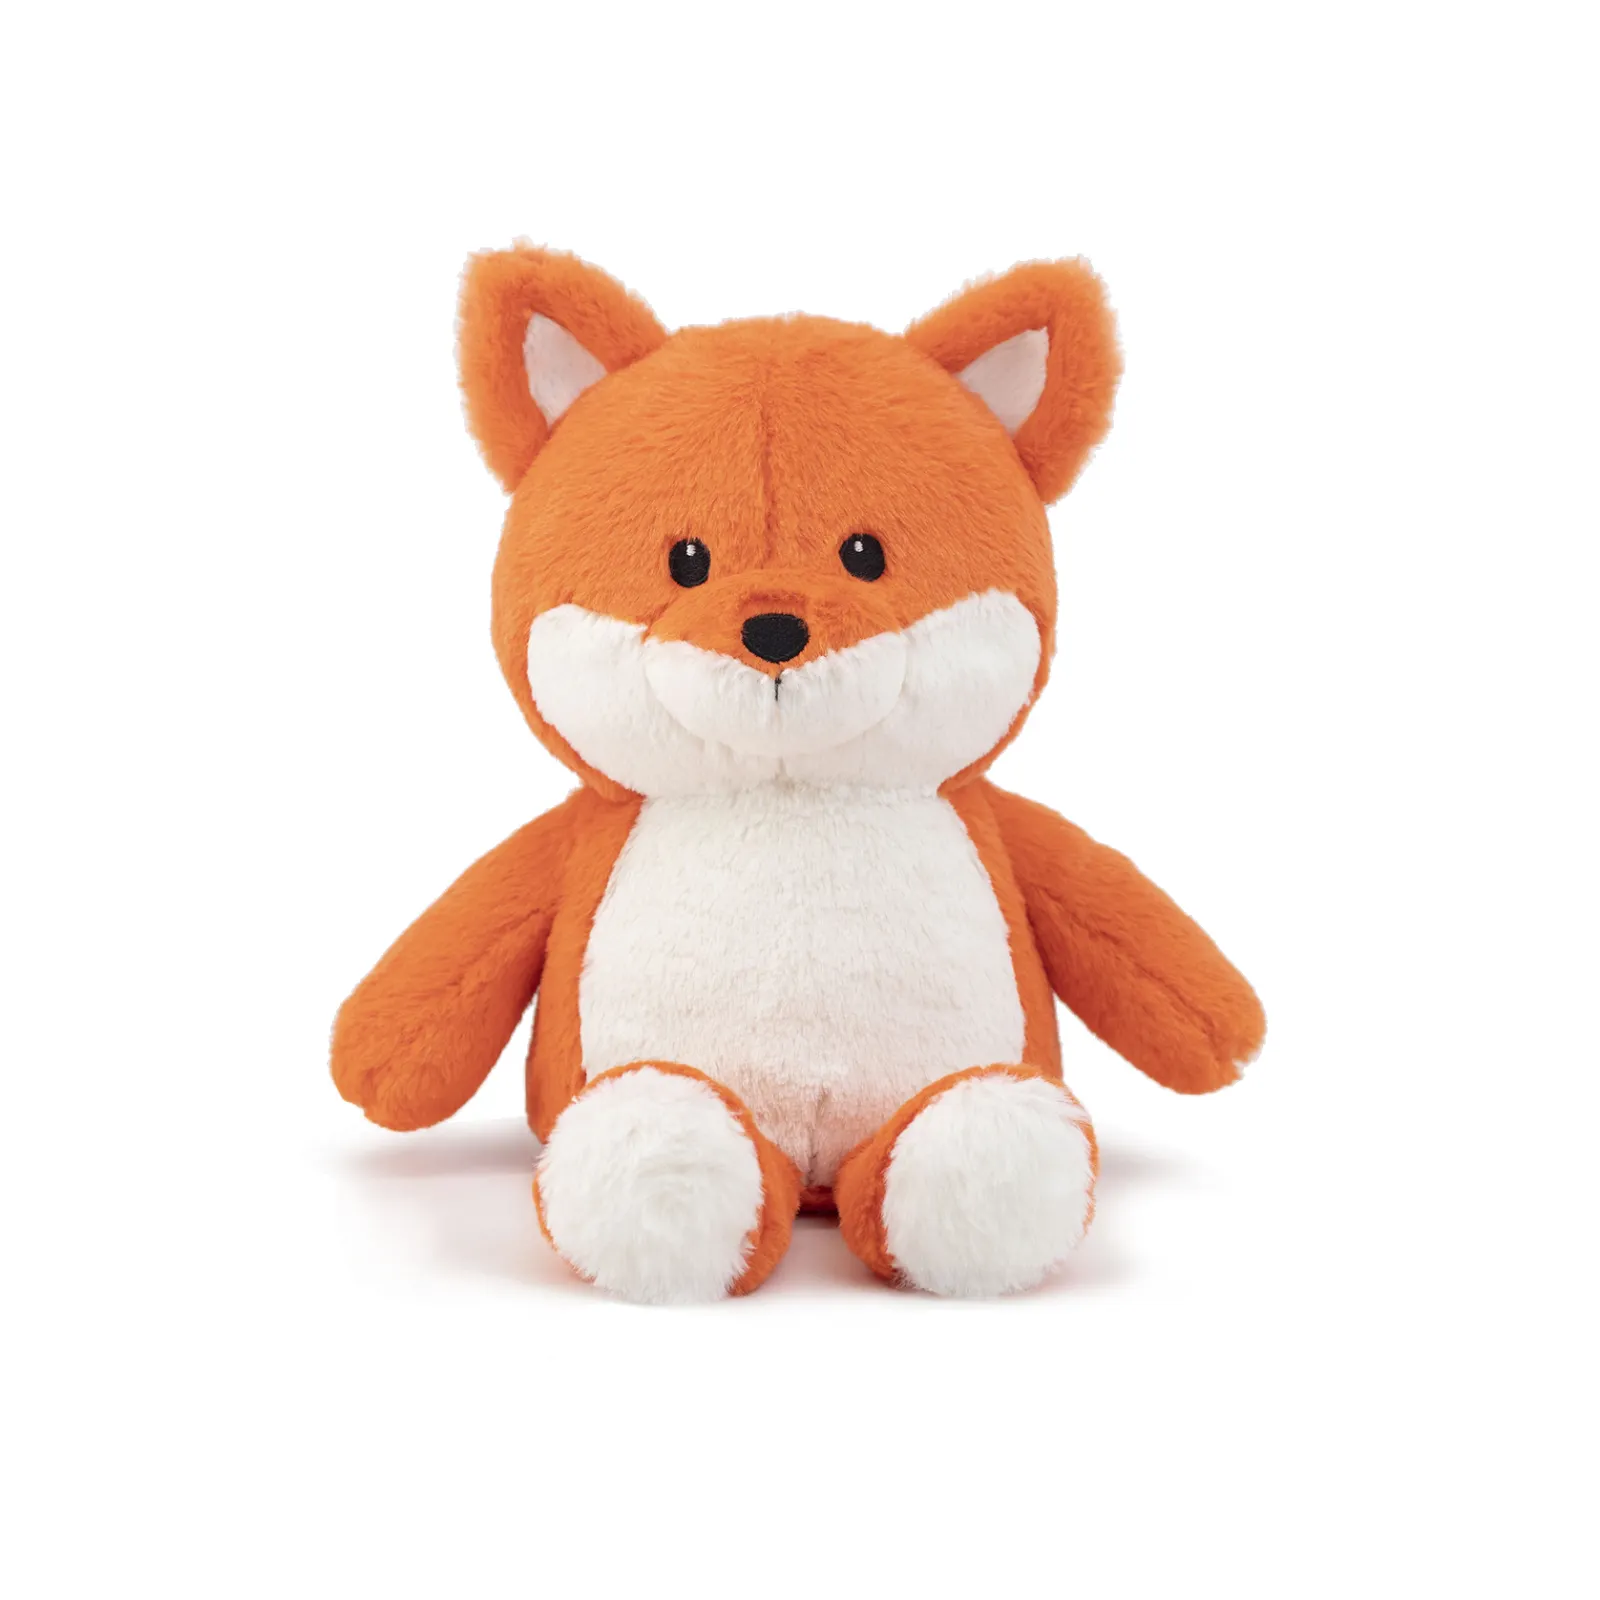 Hot New Design Microwave Heating Soft Cute Stuffed Red Fox Plush Toy For Kids Gifts